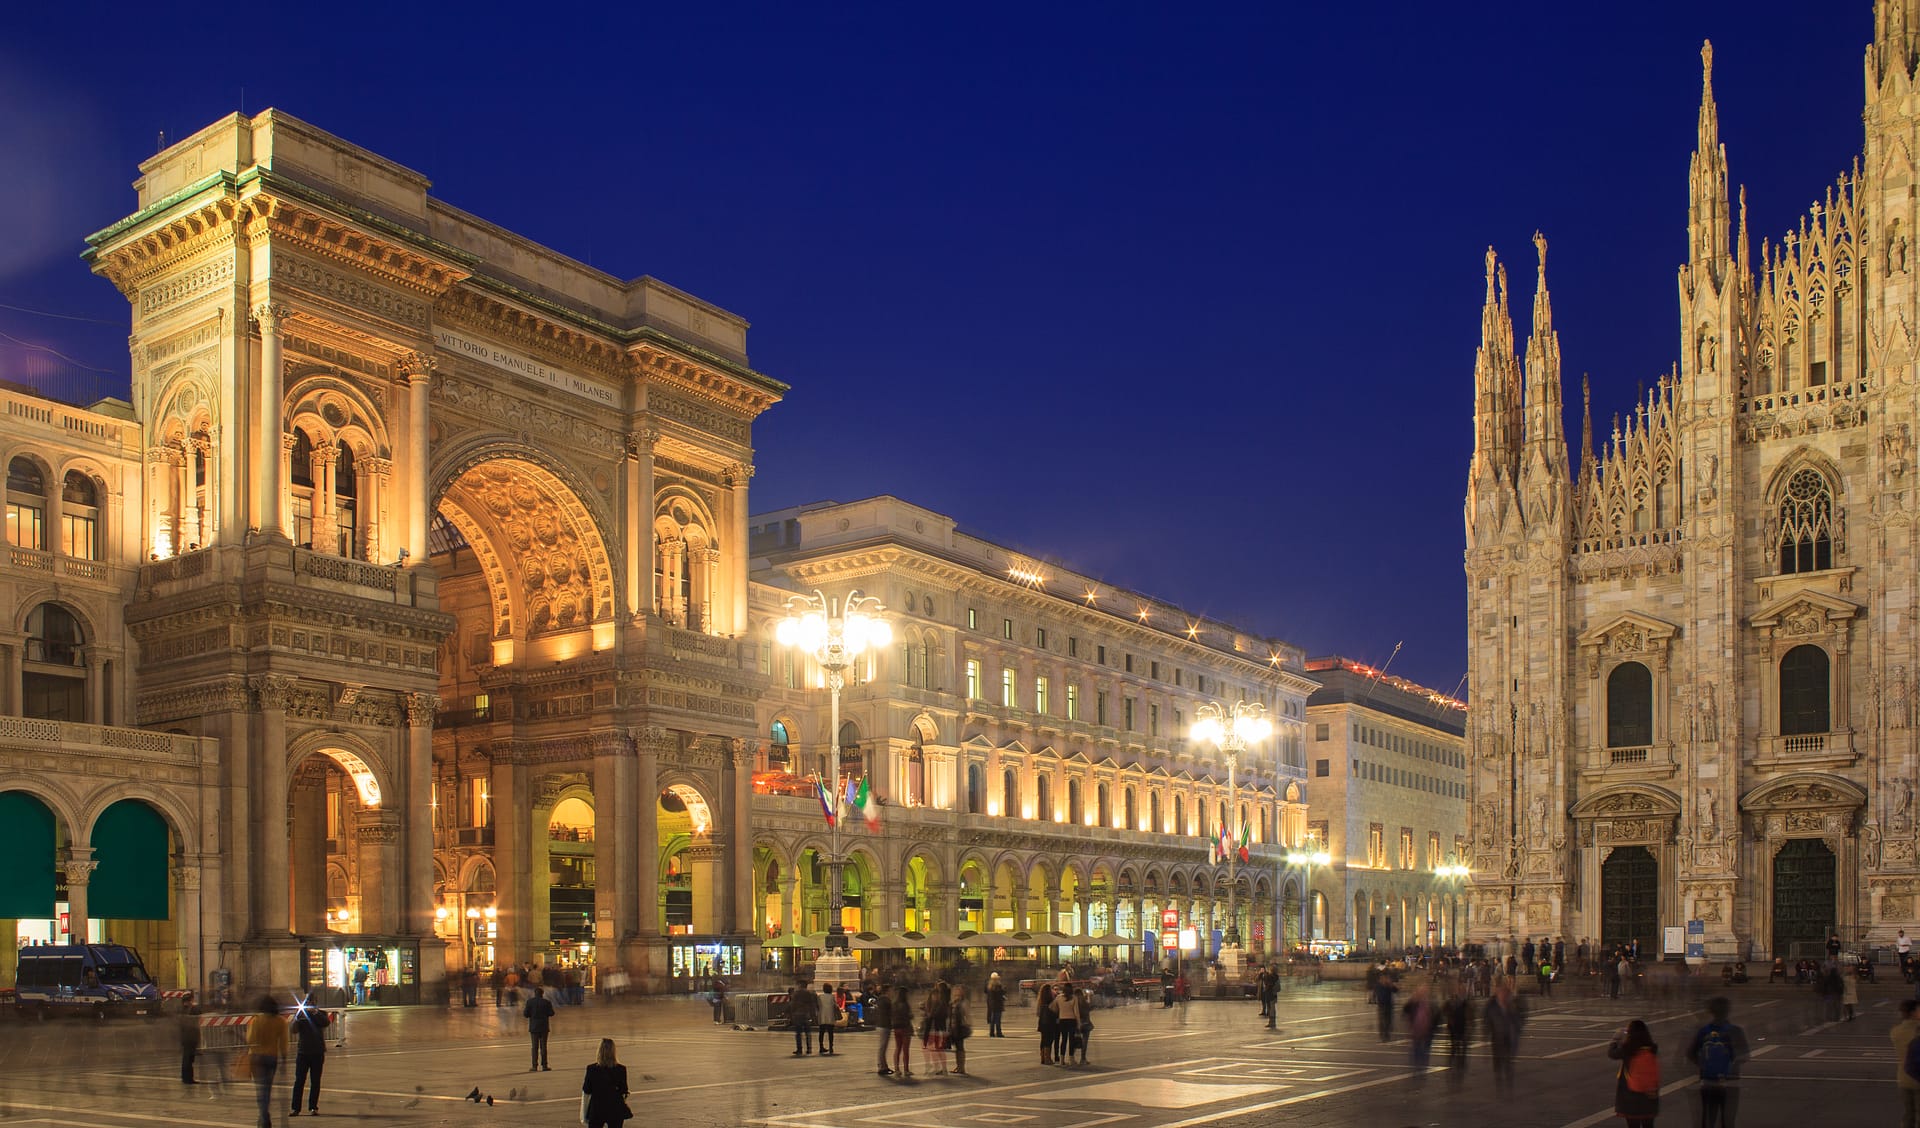 Nightview of Vittorio Emanuele II gallery and the cathedral in Piazza Duomo, Milan, Italy